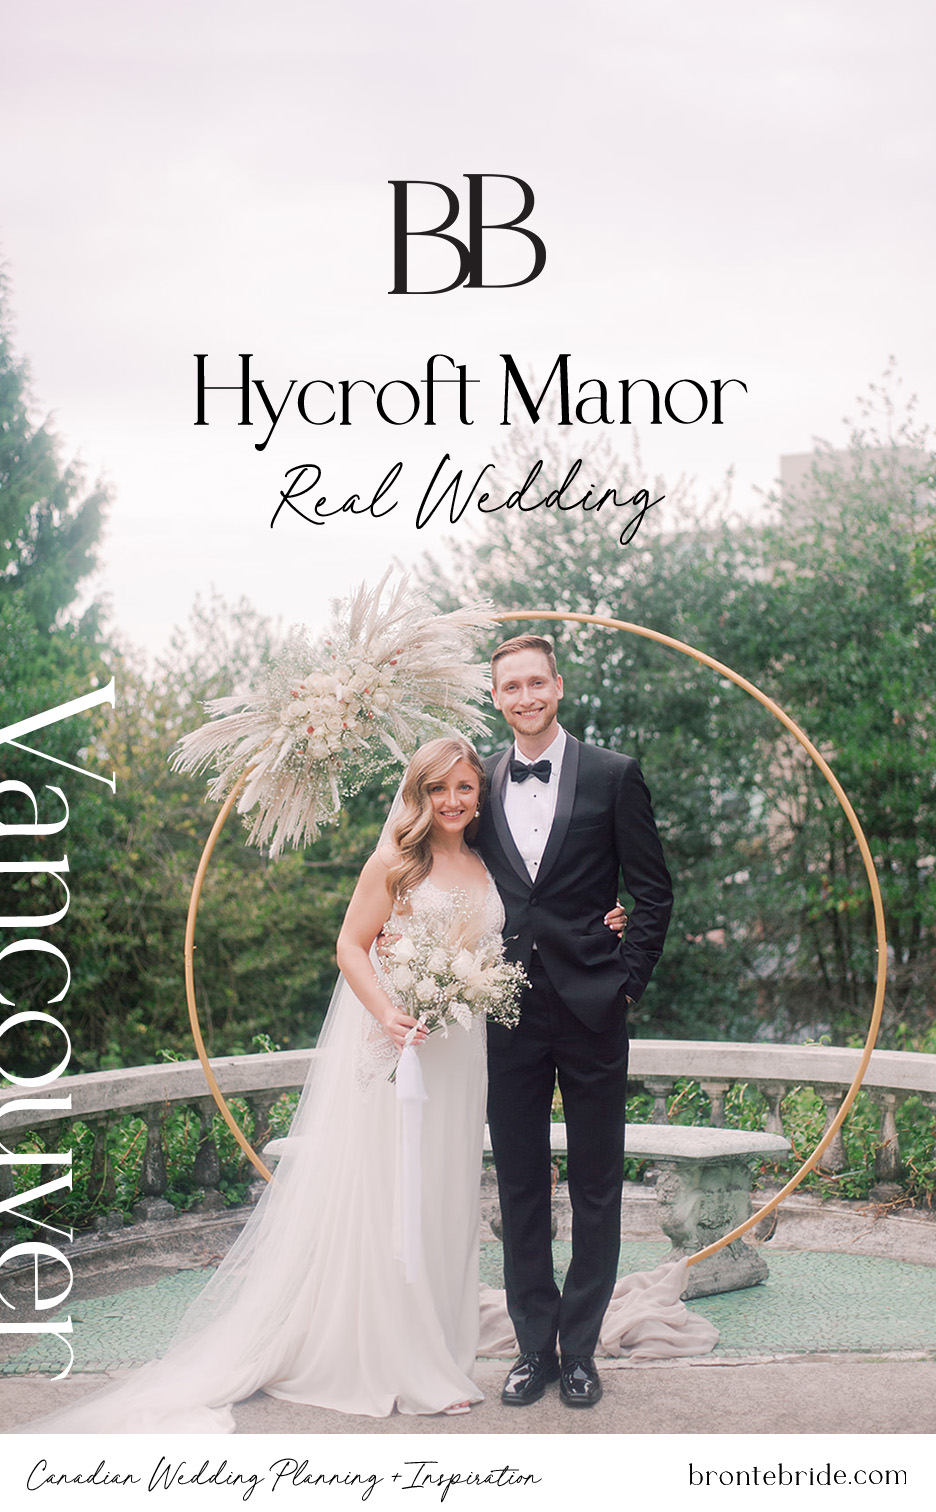 Real Wedding at Hycroft Manor - featured on Brontë Bride